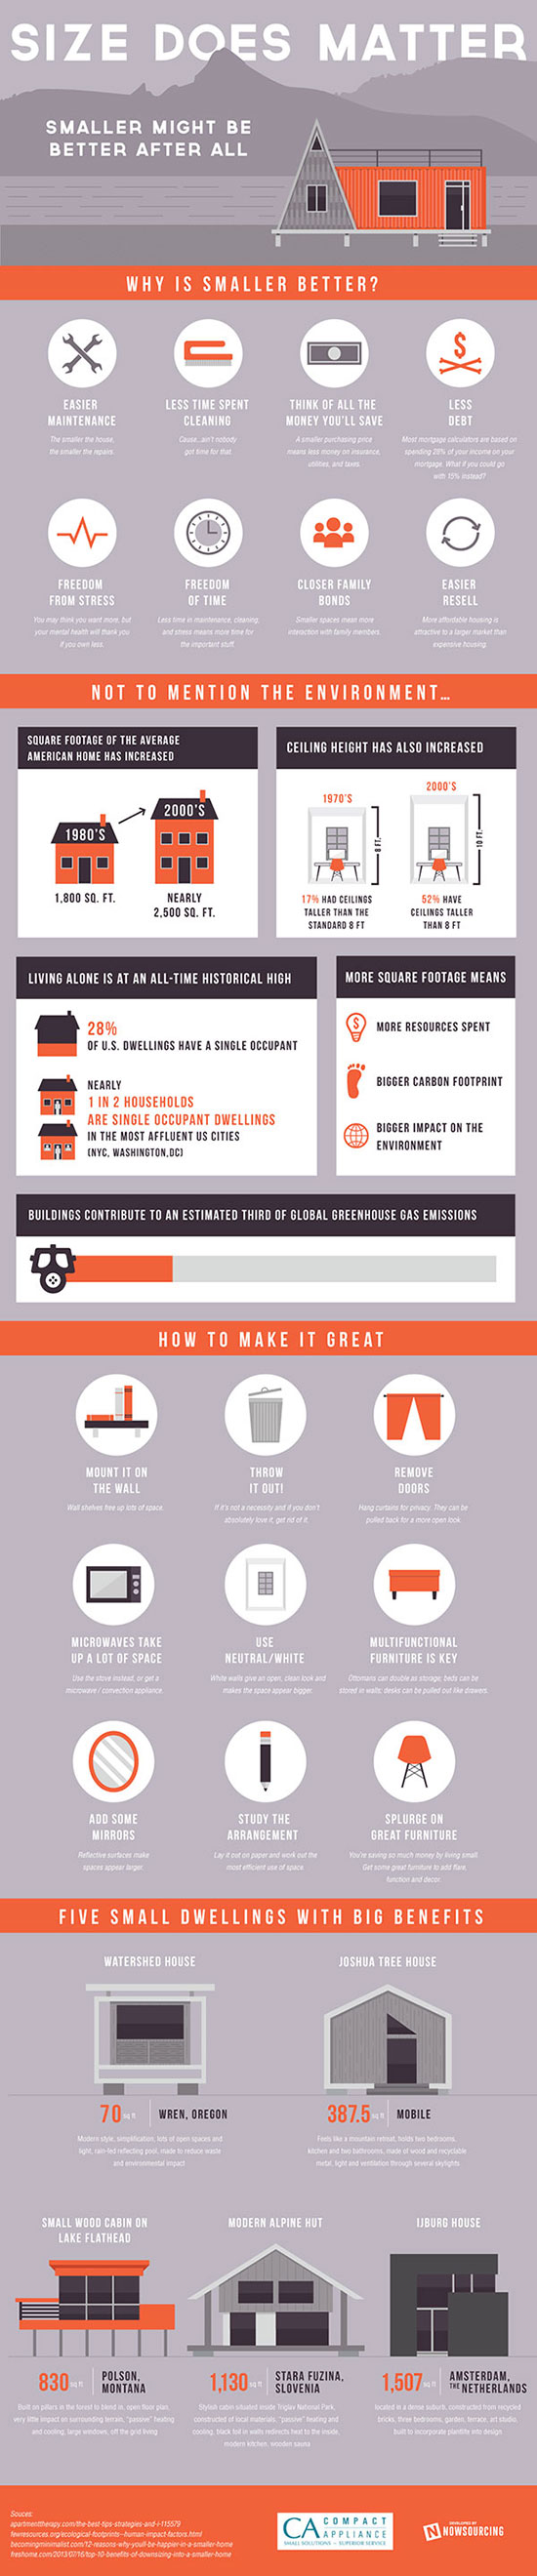 Compact Living Infographic - Why Small Living Might Be A Better For You